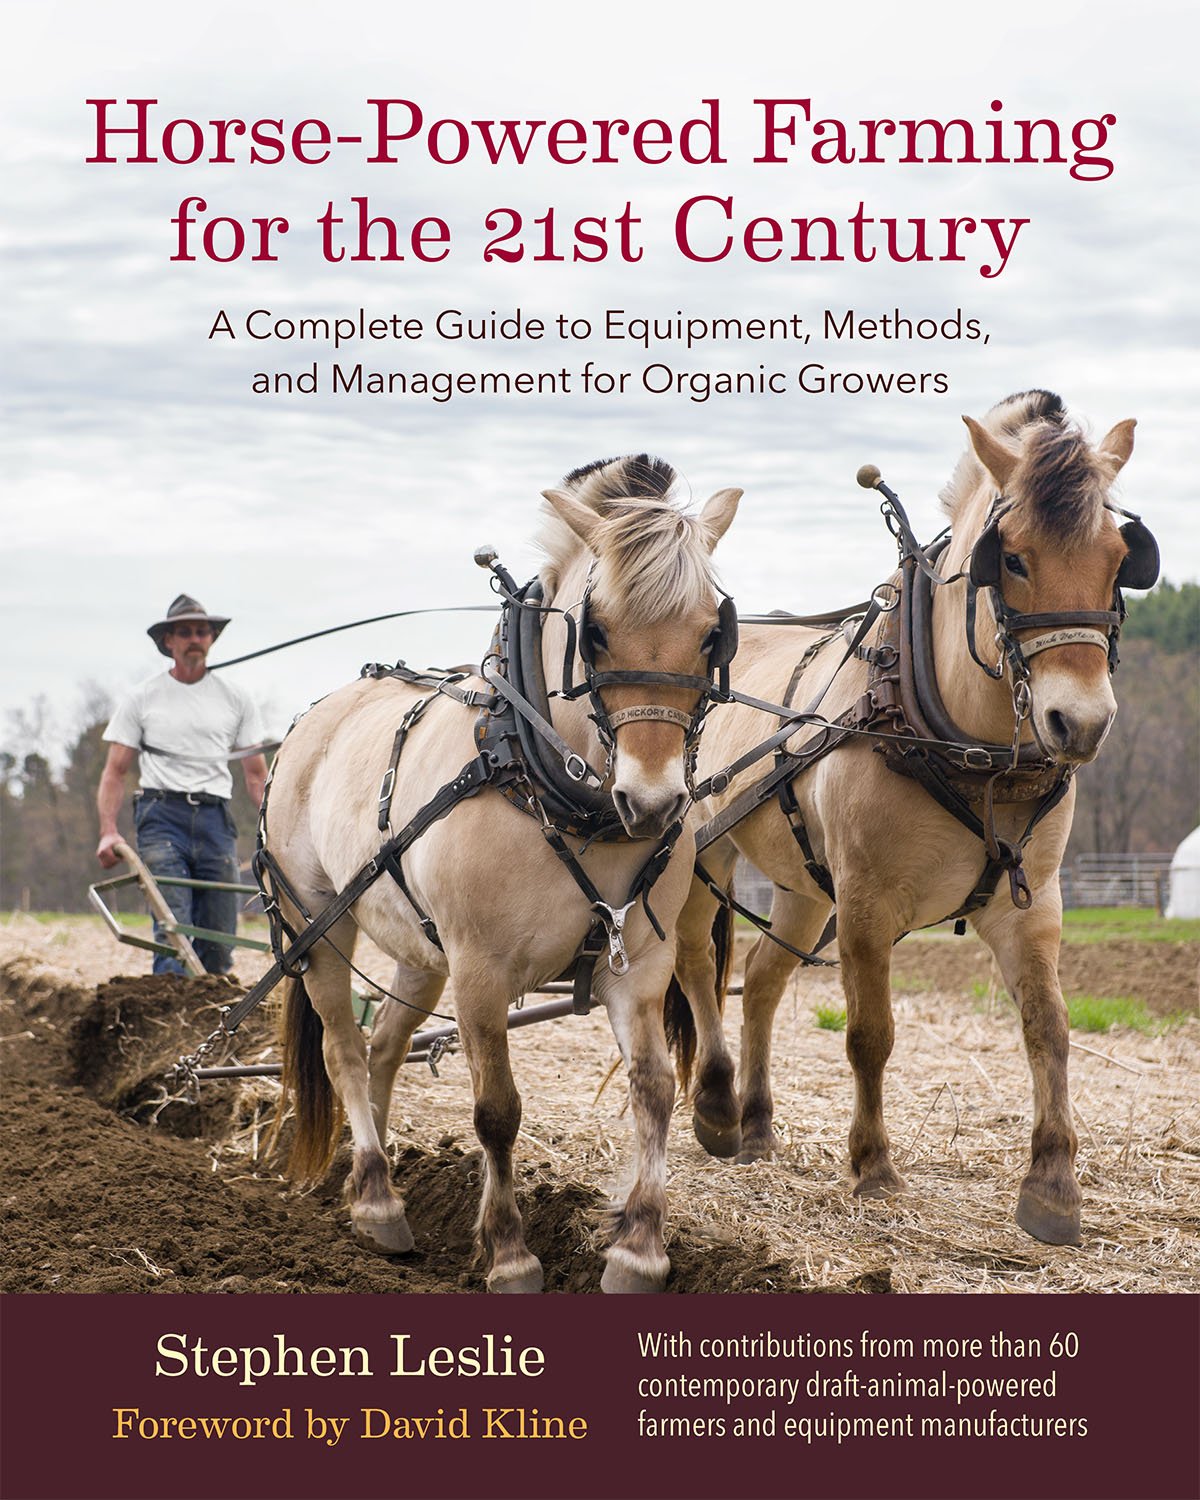 The Horse-Powered Farming for the 21st Century cover